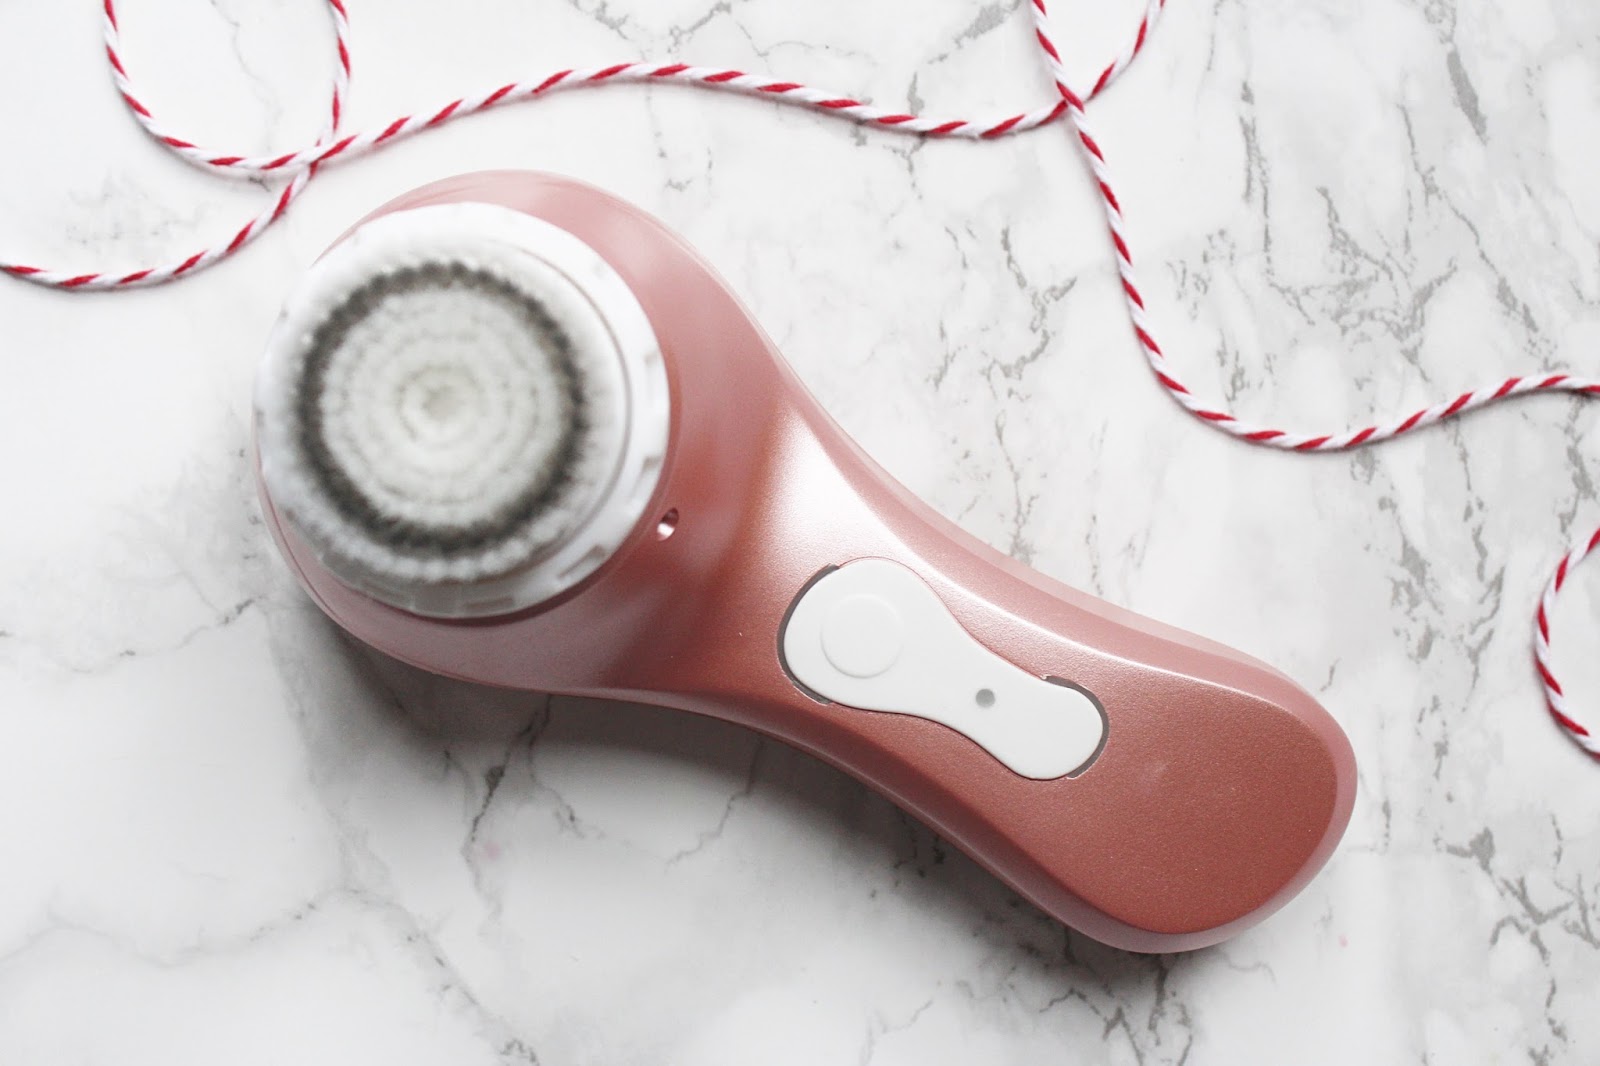 Magnitone Barefaced First Impressions 